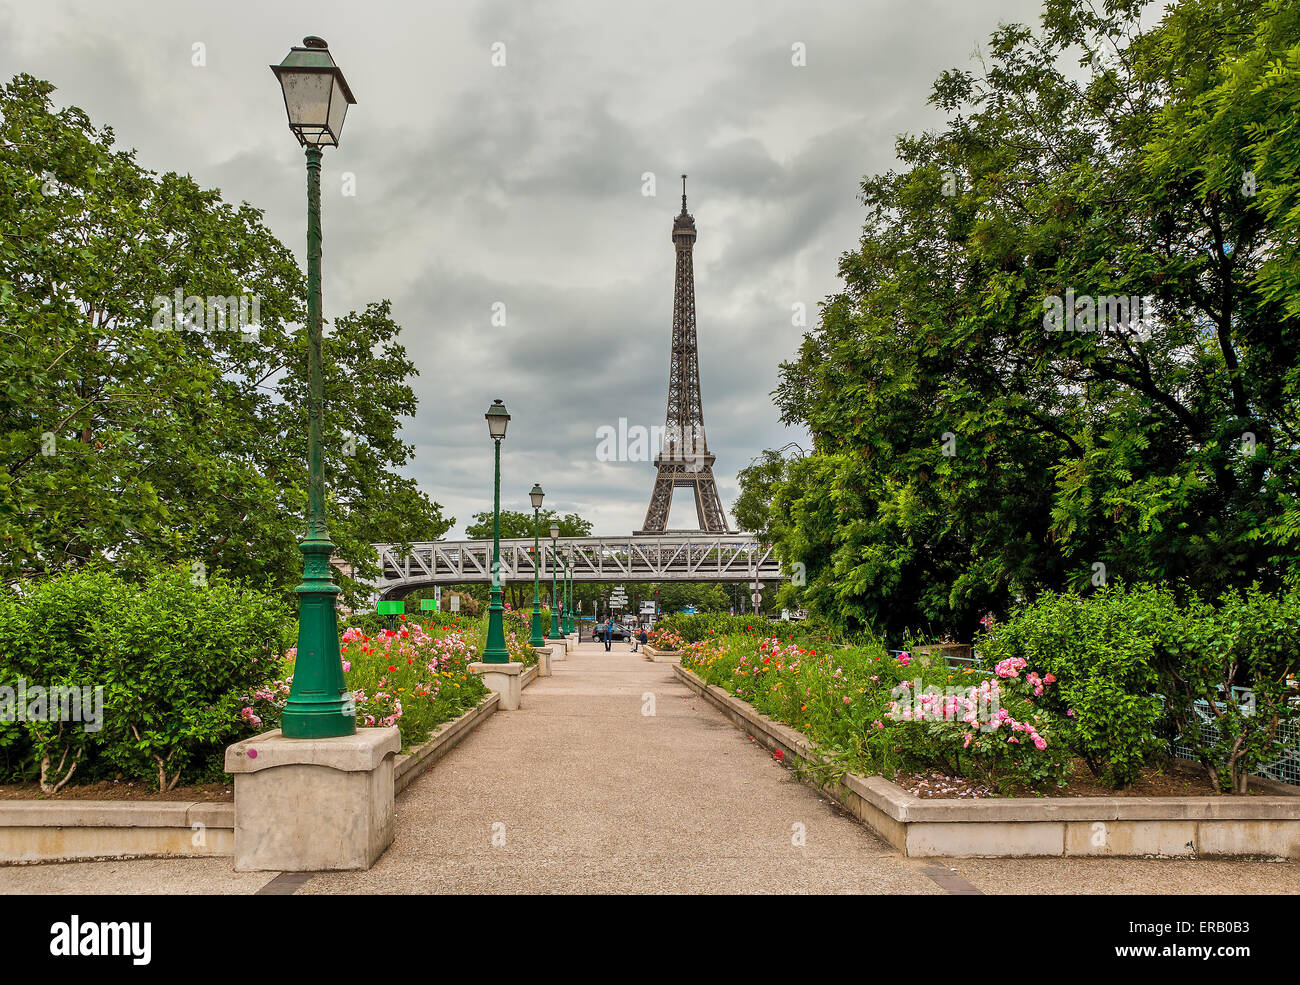 Urban park with green trees, flowers and lampposts as Eiffel Tower on background in Paris, France. Stock Photo